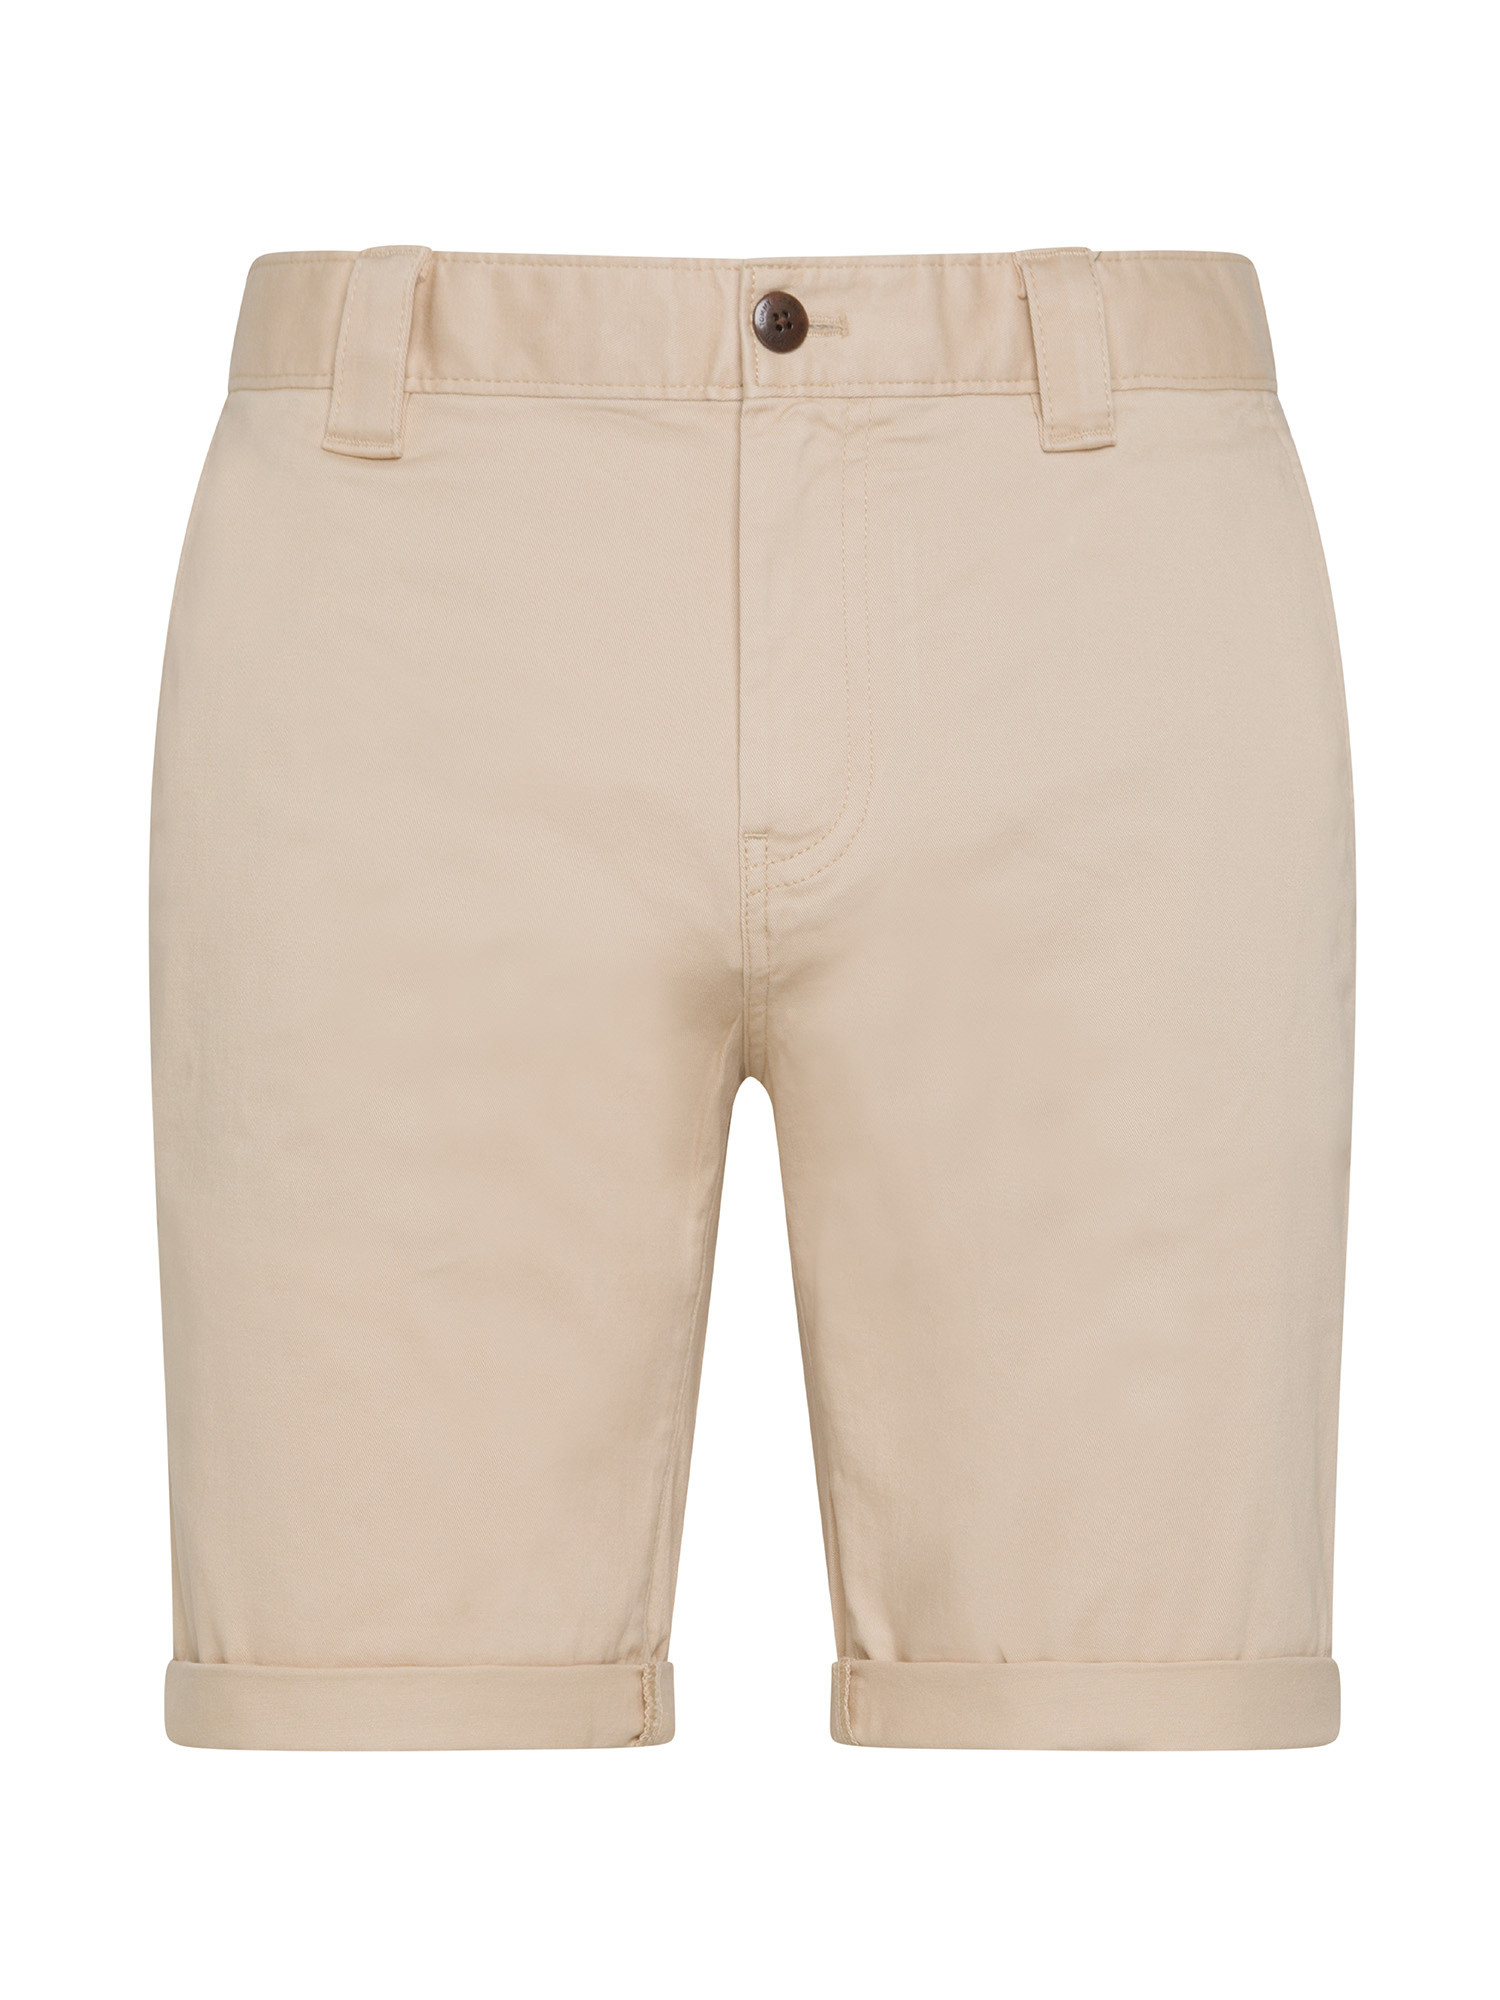 Tommy Jeans - Bermuda chino slim fit, Beige chiaro, large image number 0